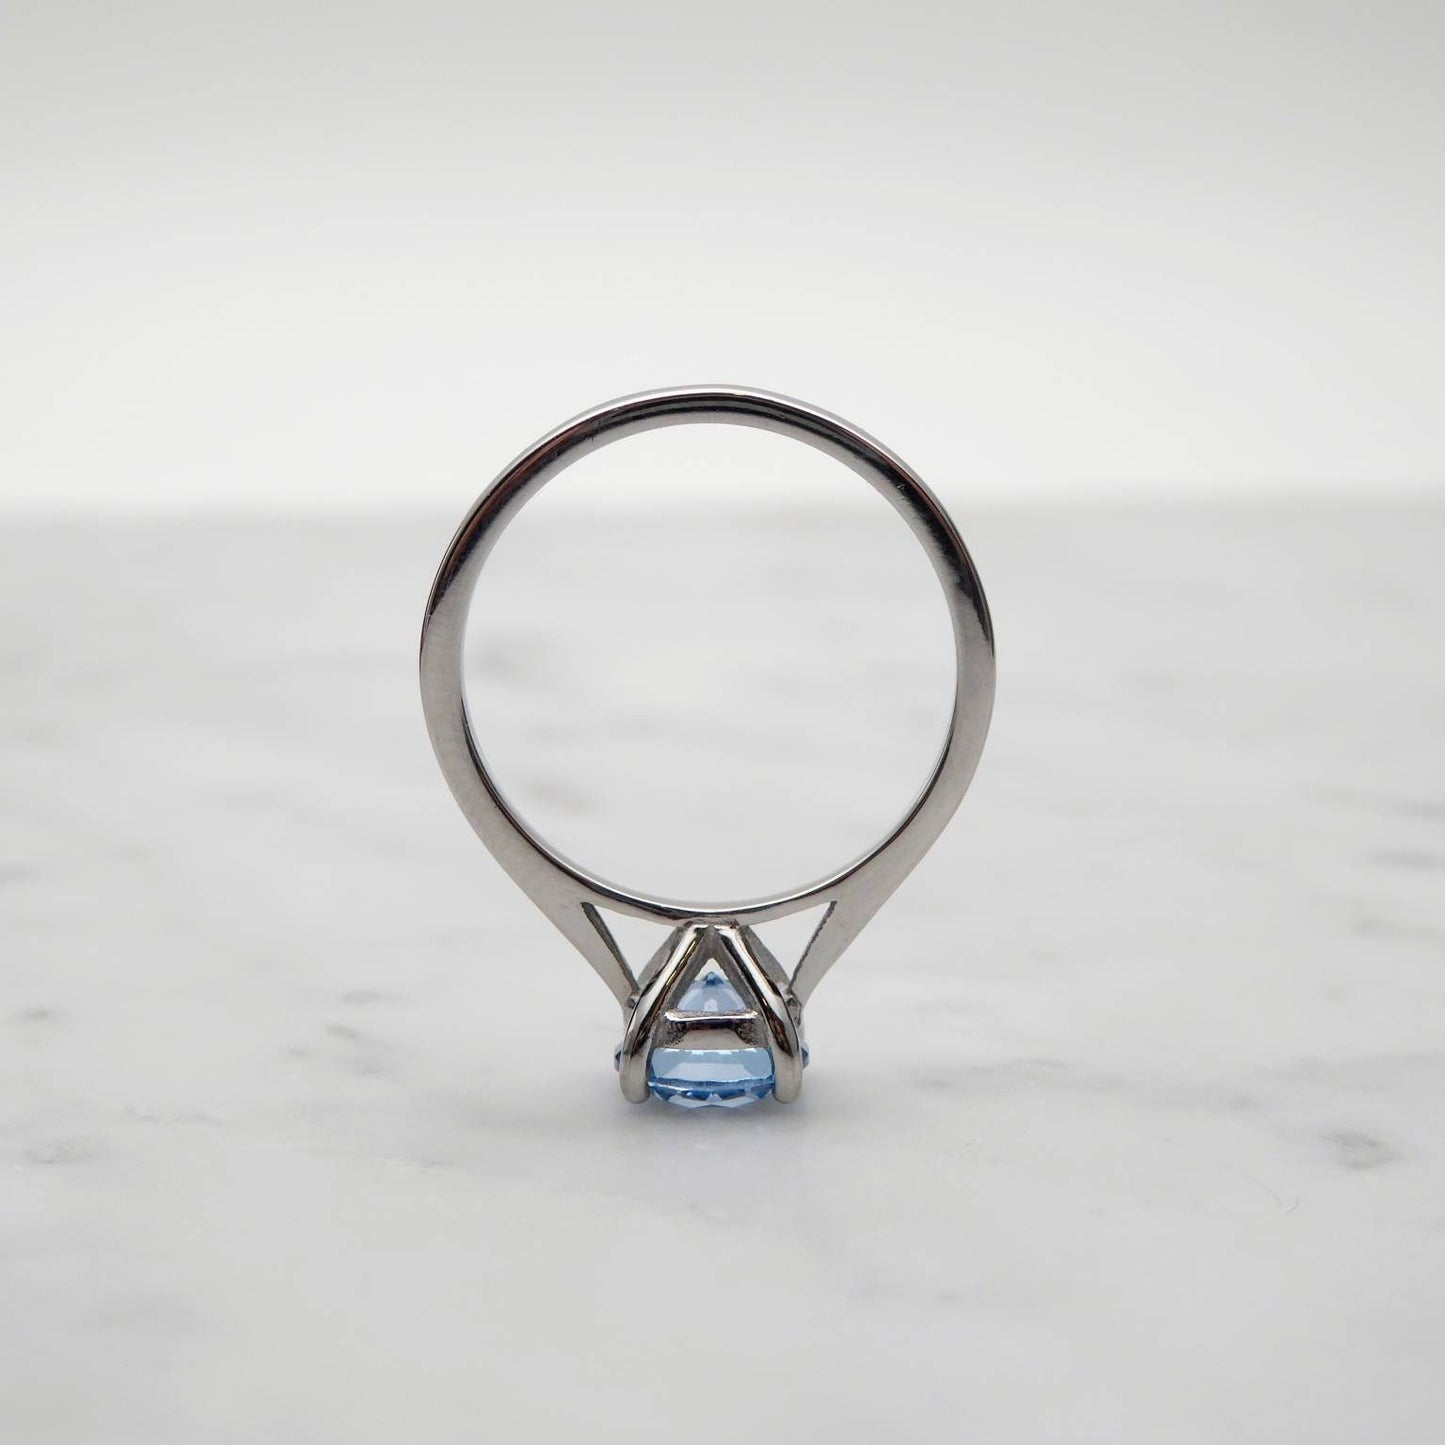 Natural 1.5ct Blue Topaz solitaire ring in Titanium or White Gold - engagement ring - wedding ring - handmade ring